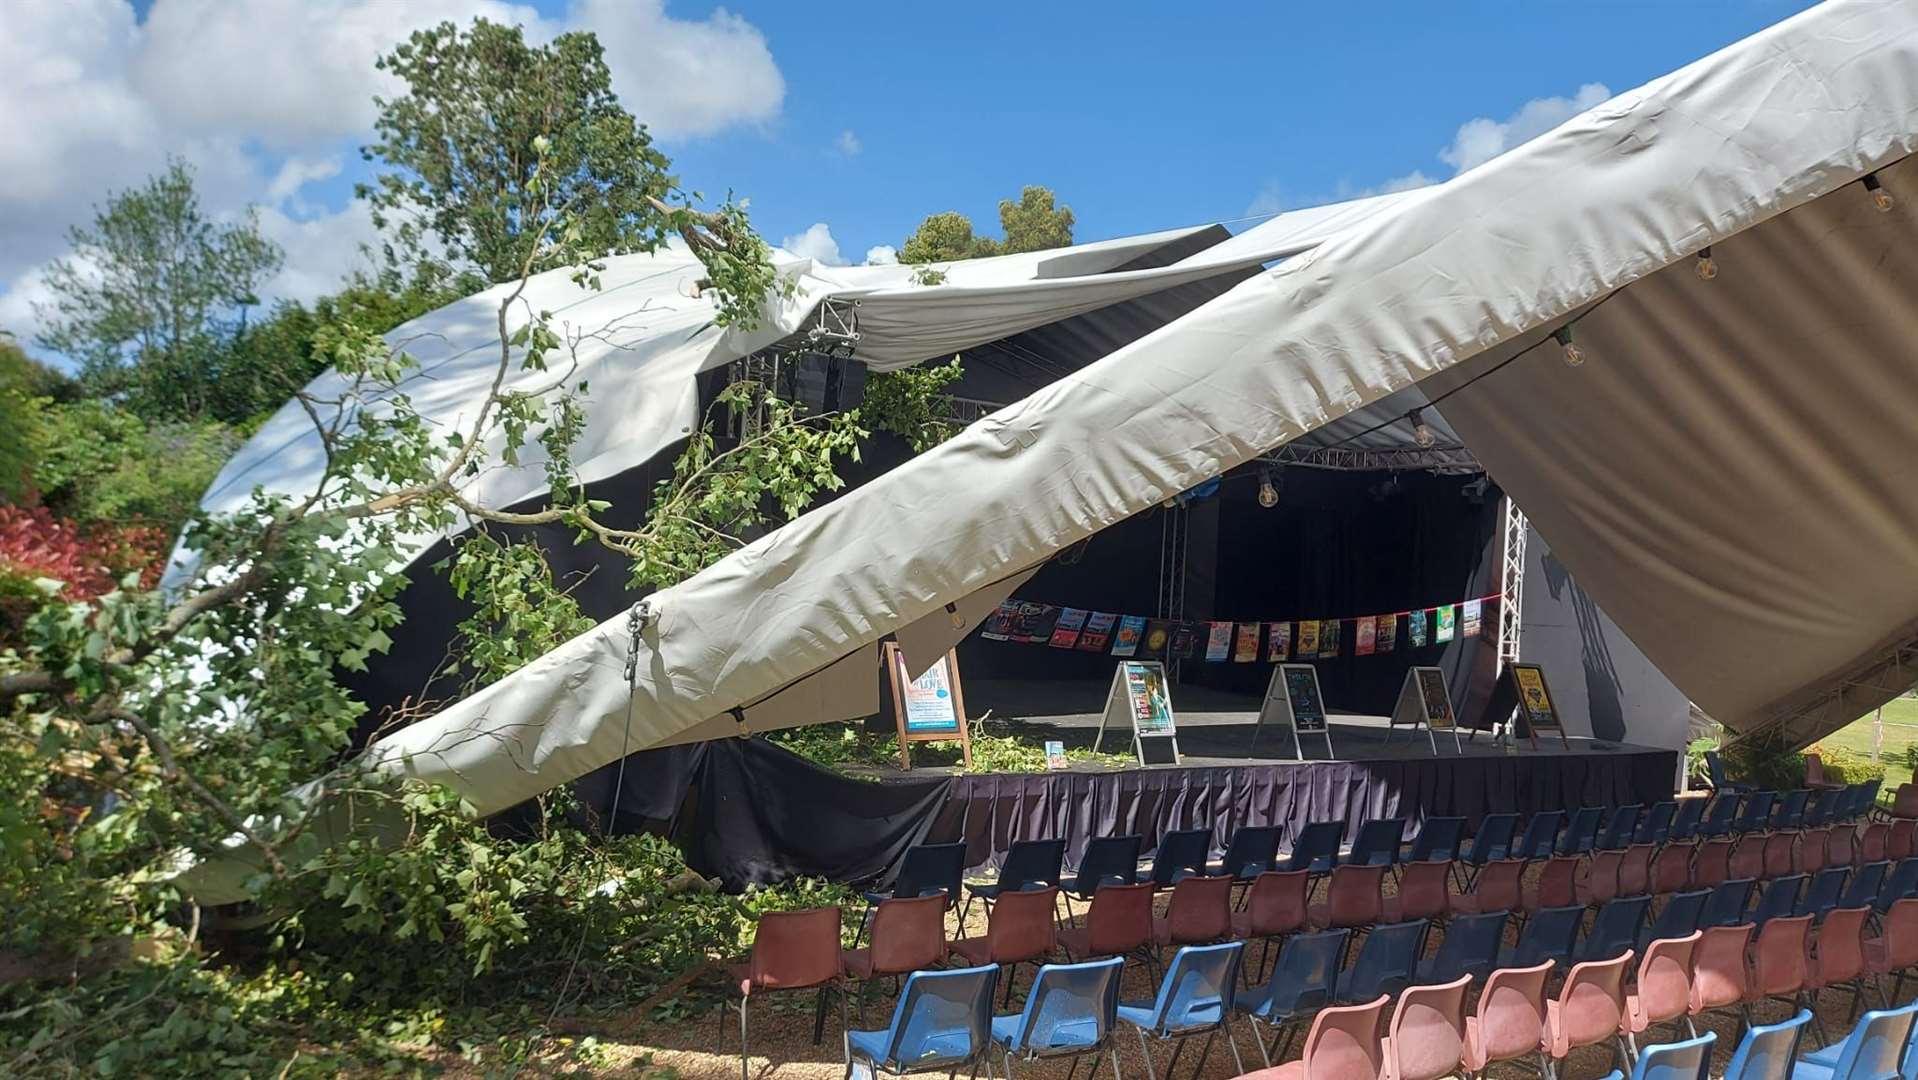 The theatre roof was damaged 'beyond repair'